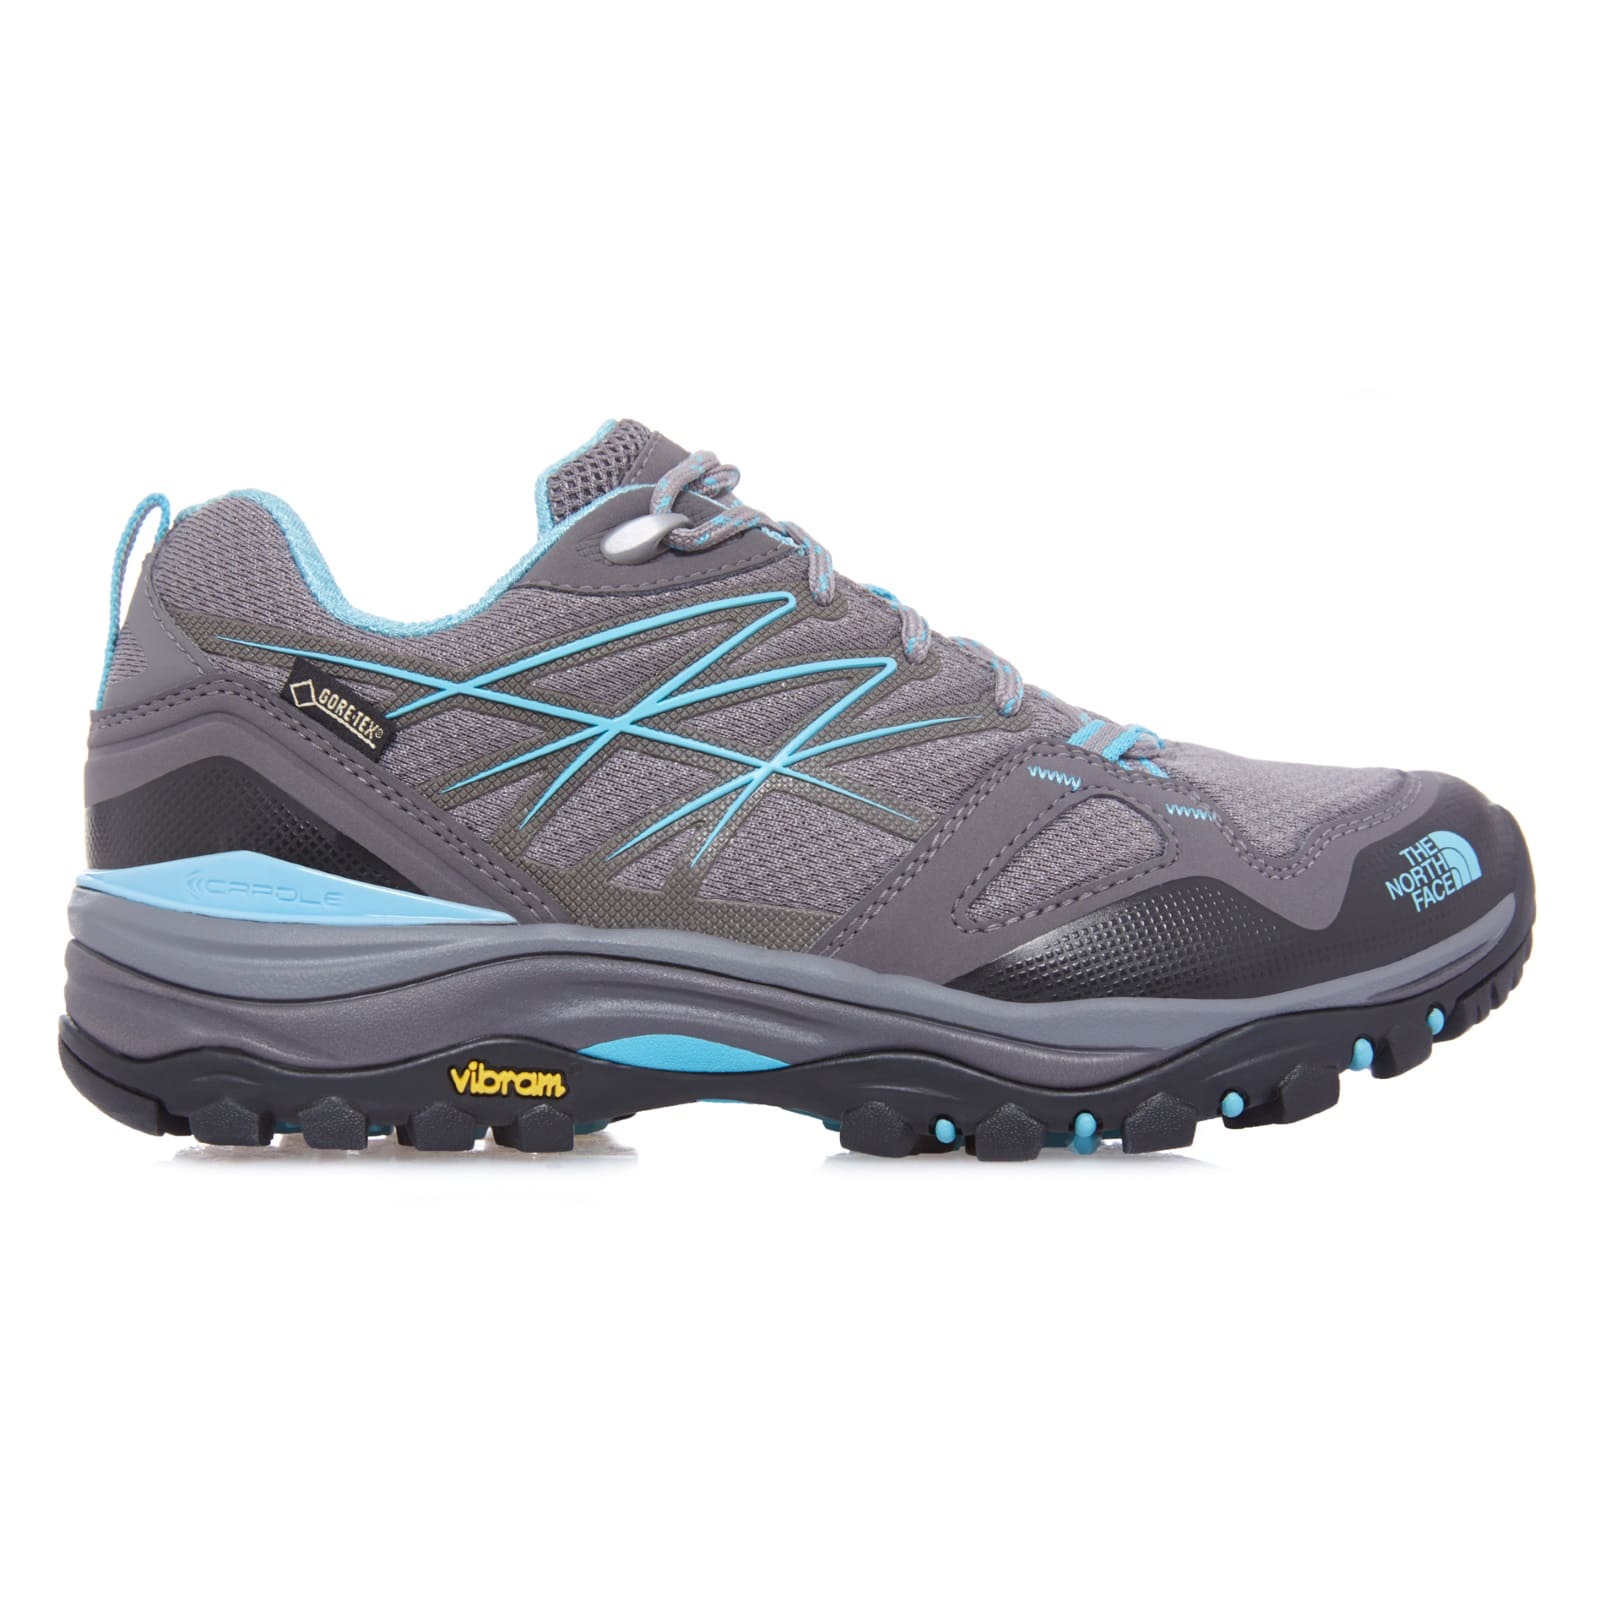 Hedgehog Fastpack GTX from Outnorth